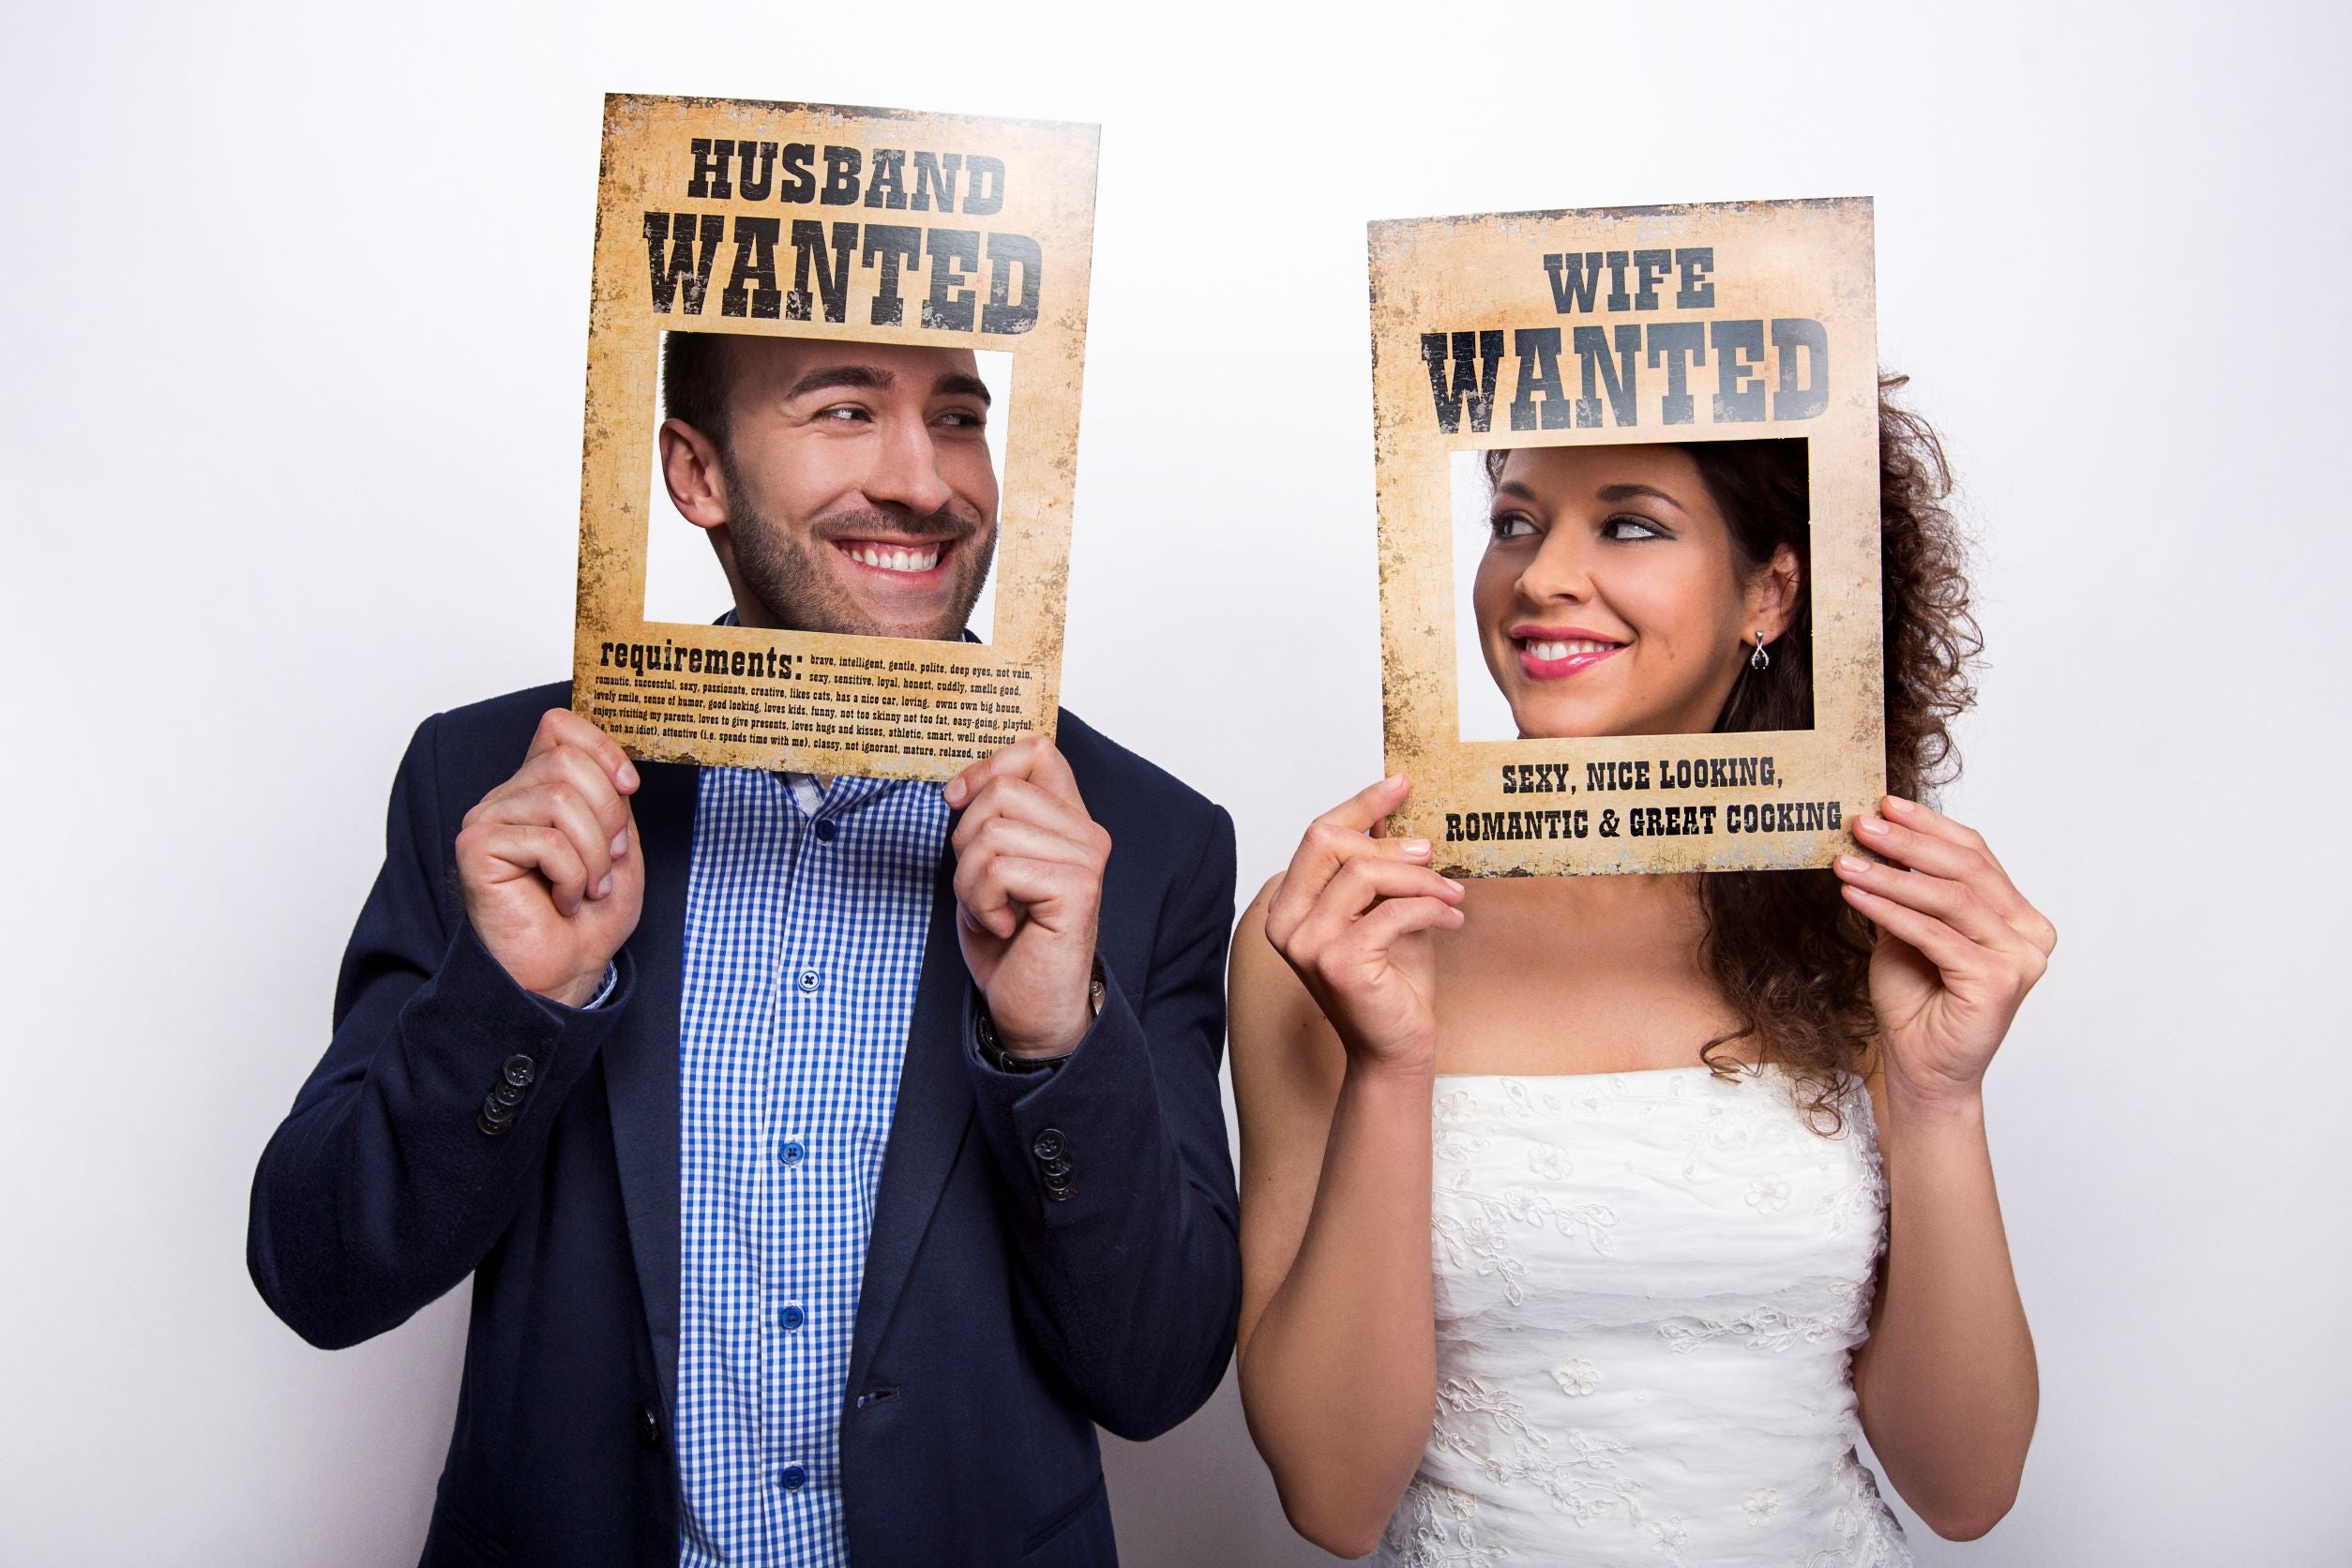 Funny photo booth boards Husband Wanted and Wife Wanted